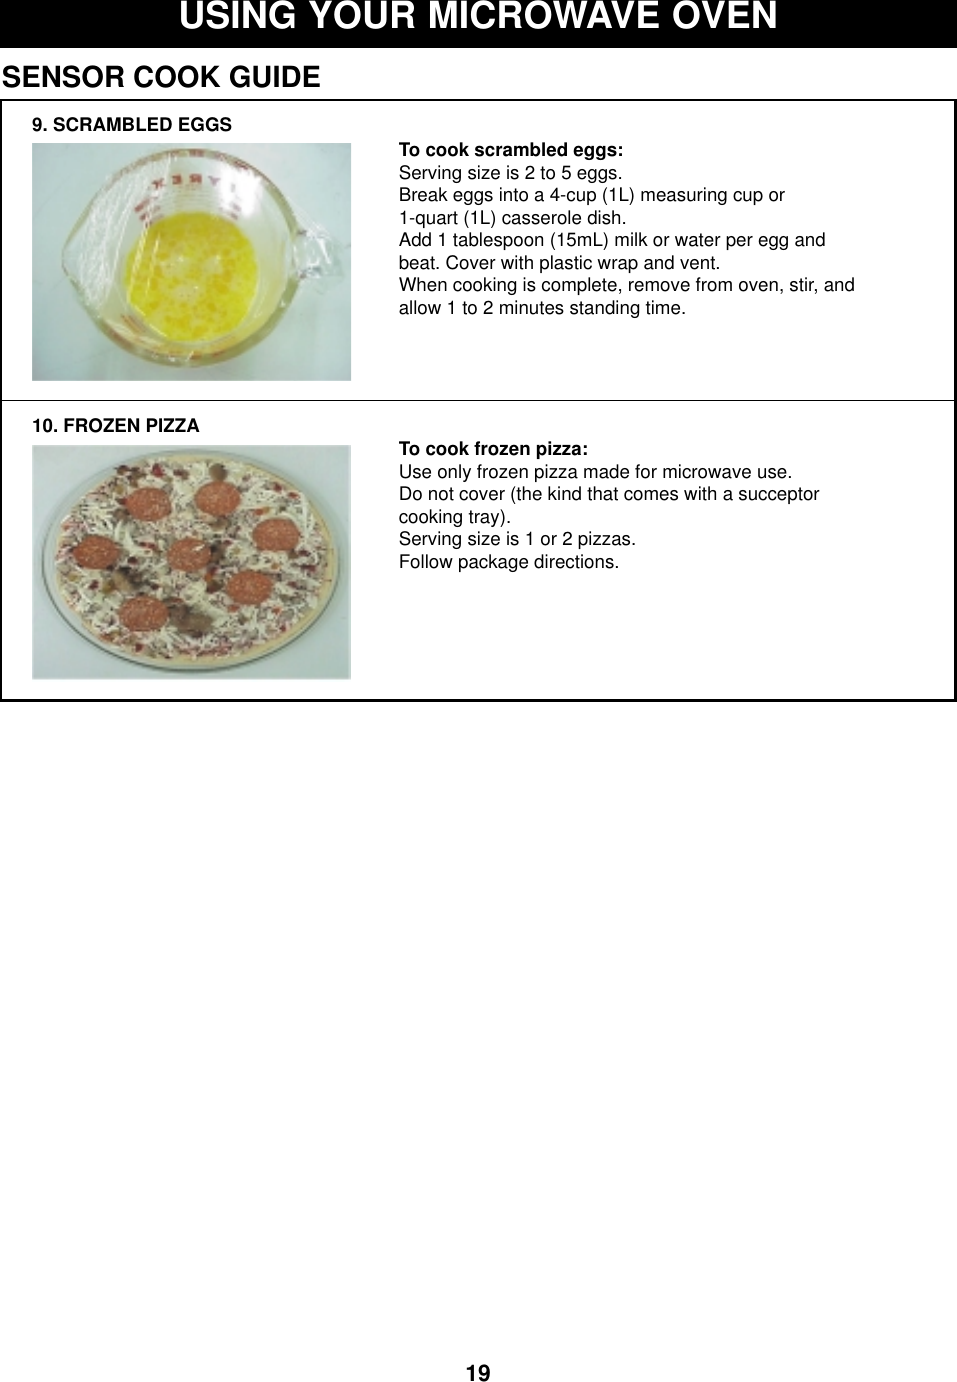 19USING YOUR MICROWAVE OVENSENSOR COOK GUIDE9. SCRAMBLED EGGS10. FROZEN PIZZATo cook scrambled eggs:Serving size is 2 to 5 eggs.Break eggs into a 4-cup (1L) measuring cup or 1-quart (1L) casserole dish. Add 1 tablespoon (15mL) milk or water per egg andbeat. Cover with plastic wrap and vent. When cooking is complete, remove from oven, stir, andallow 1 to 2 minutes standing time.To cook frozen pizza:Use only frozen pizza made for microwave use.Do not cover (the kind that comes with a succeptorcooking tray).Serving size is 1 or 2 pizzas.Follow package directions. 